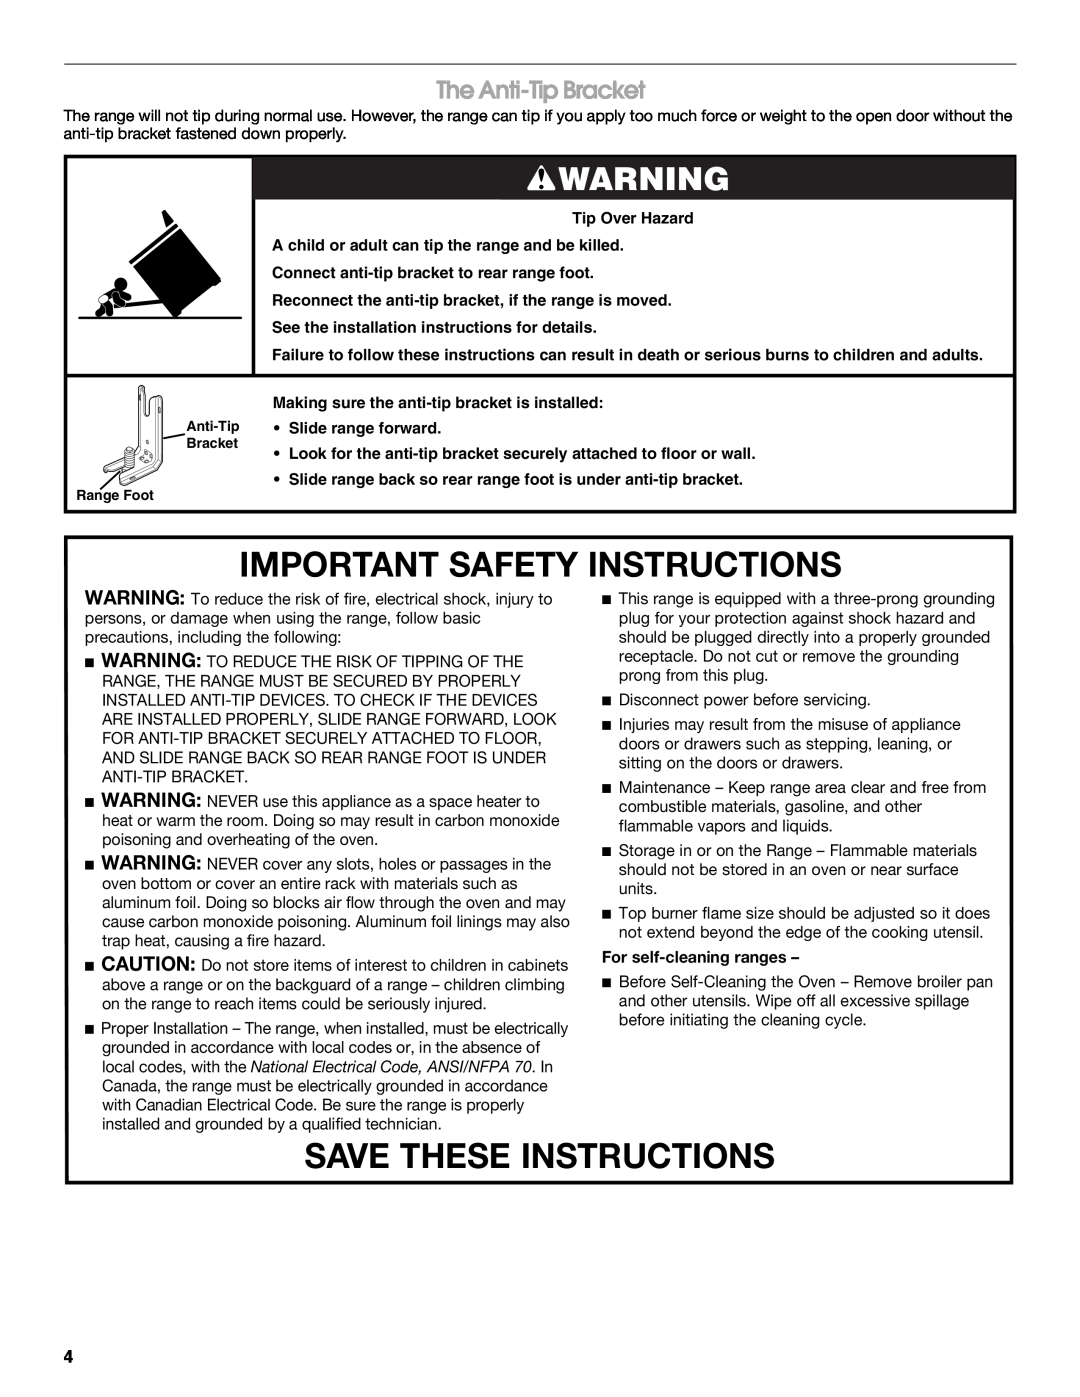 Jenn-Air JGS8850 The Anti-Tip Bracket, Important Safety Instructions, Save These Instructions, For self-cleaning ranges 